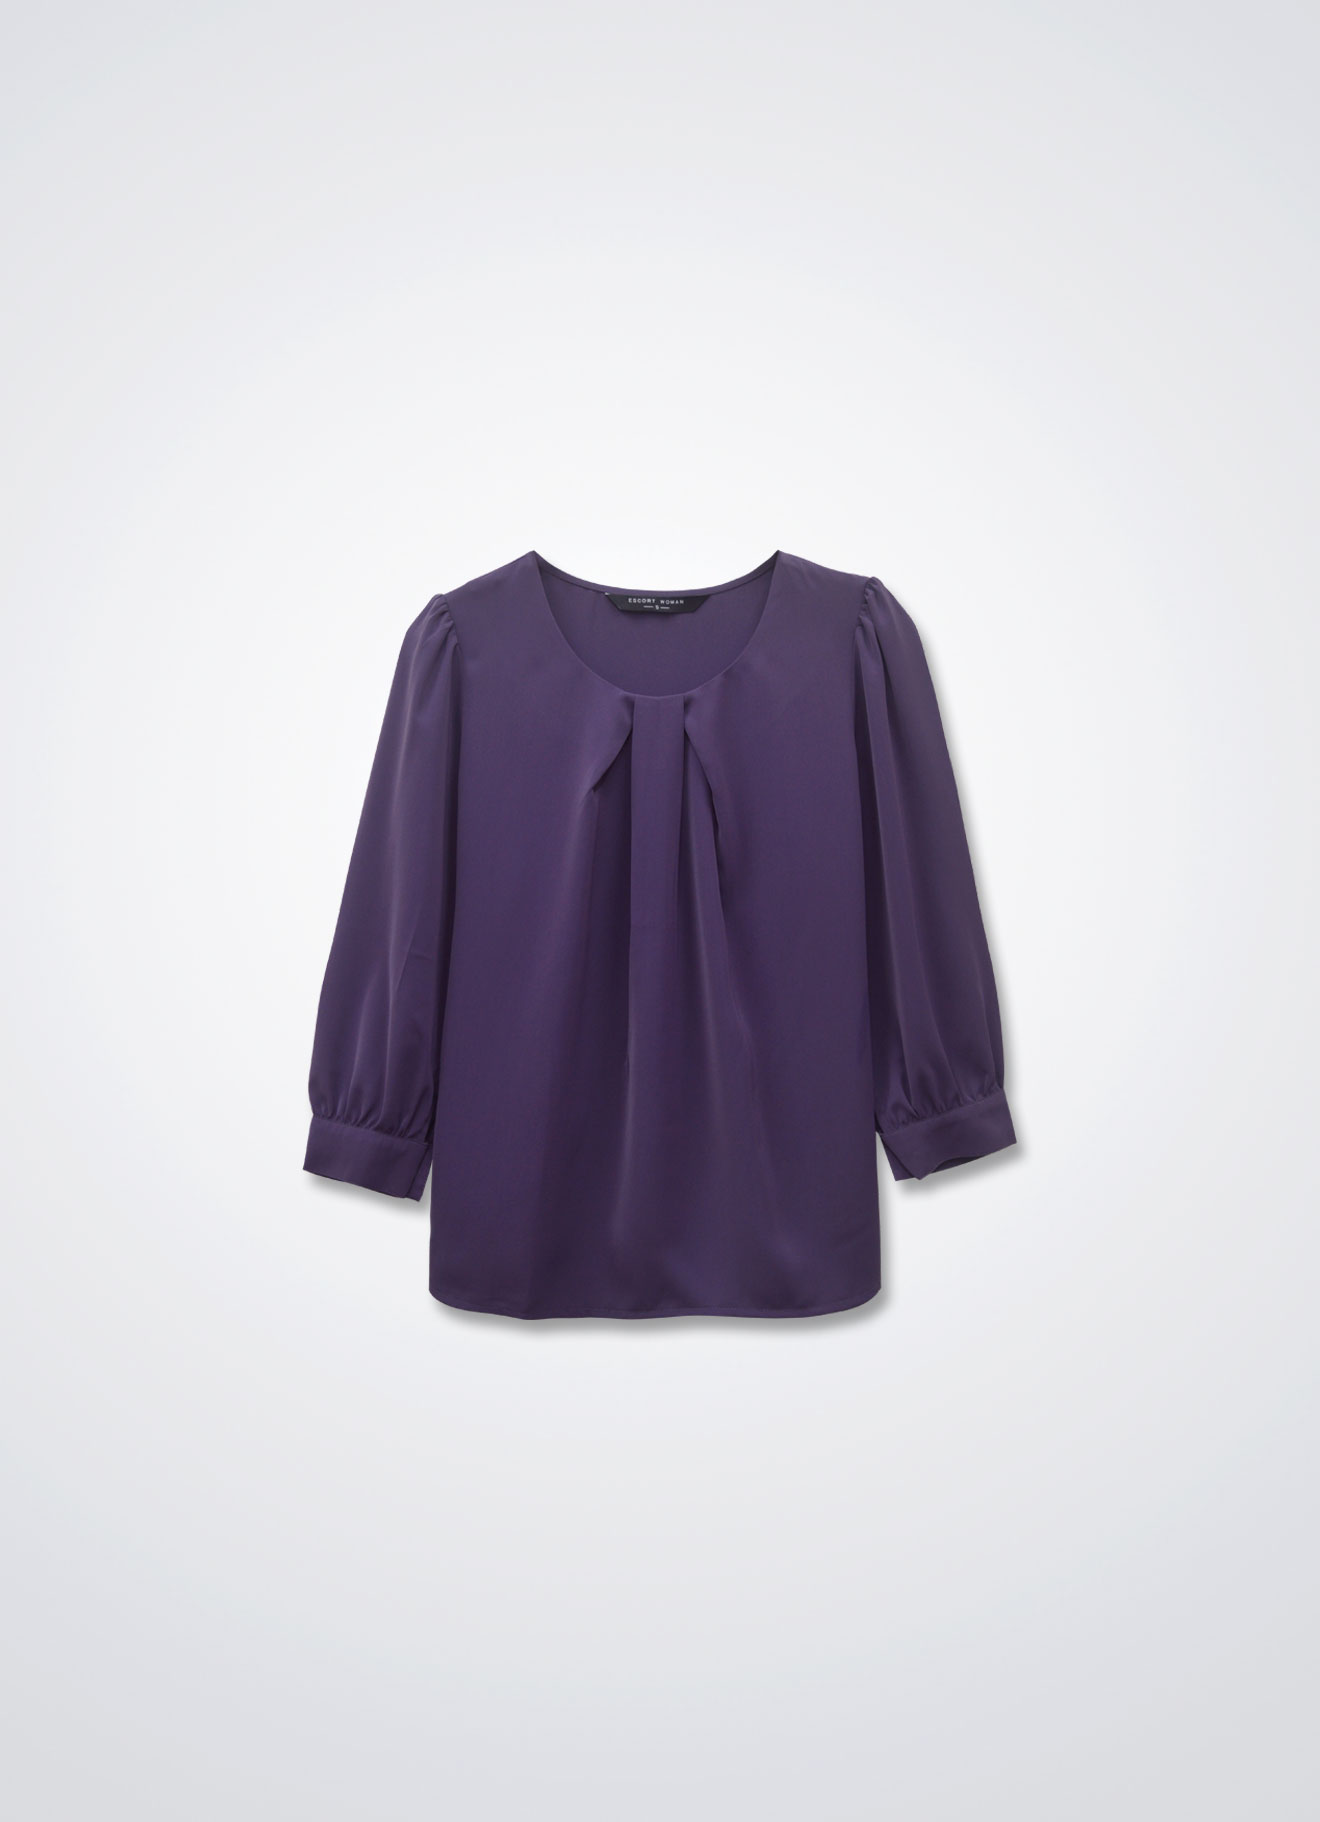 Loganberry by Sleeve Blouse